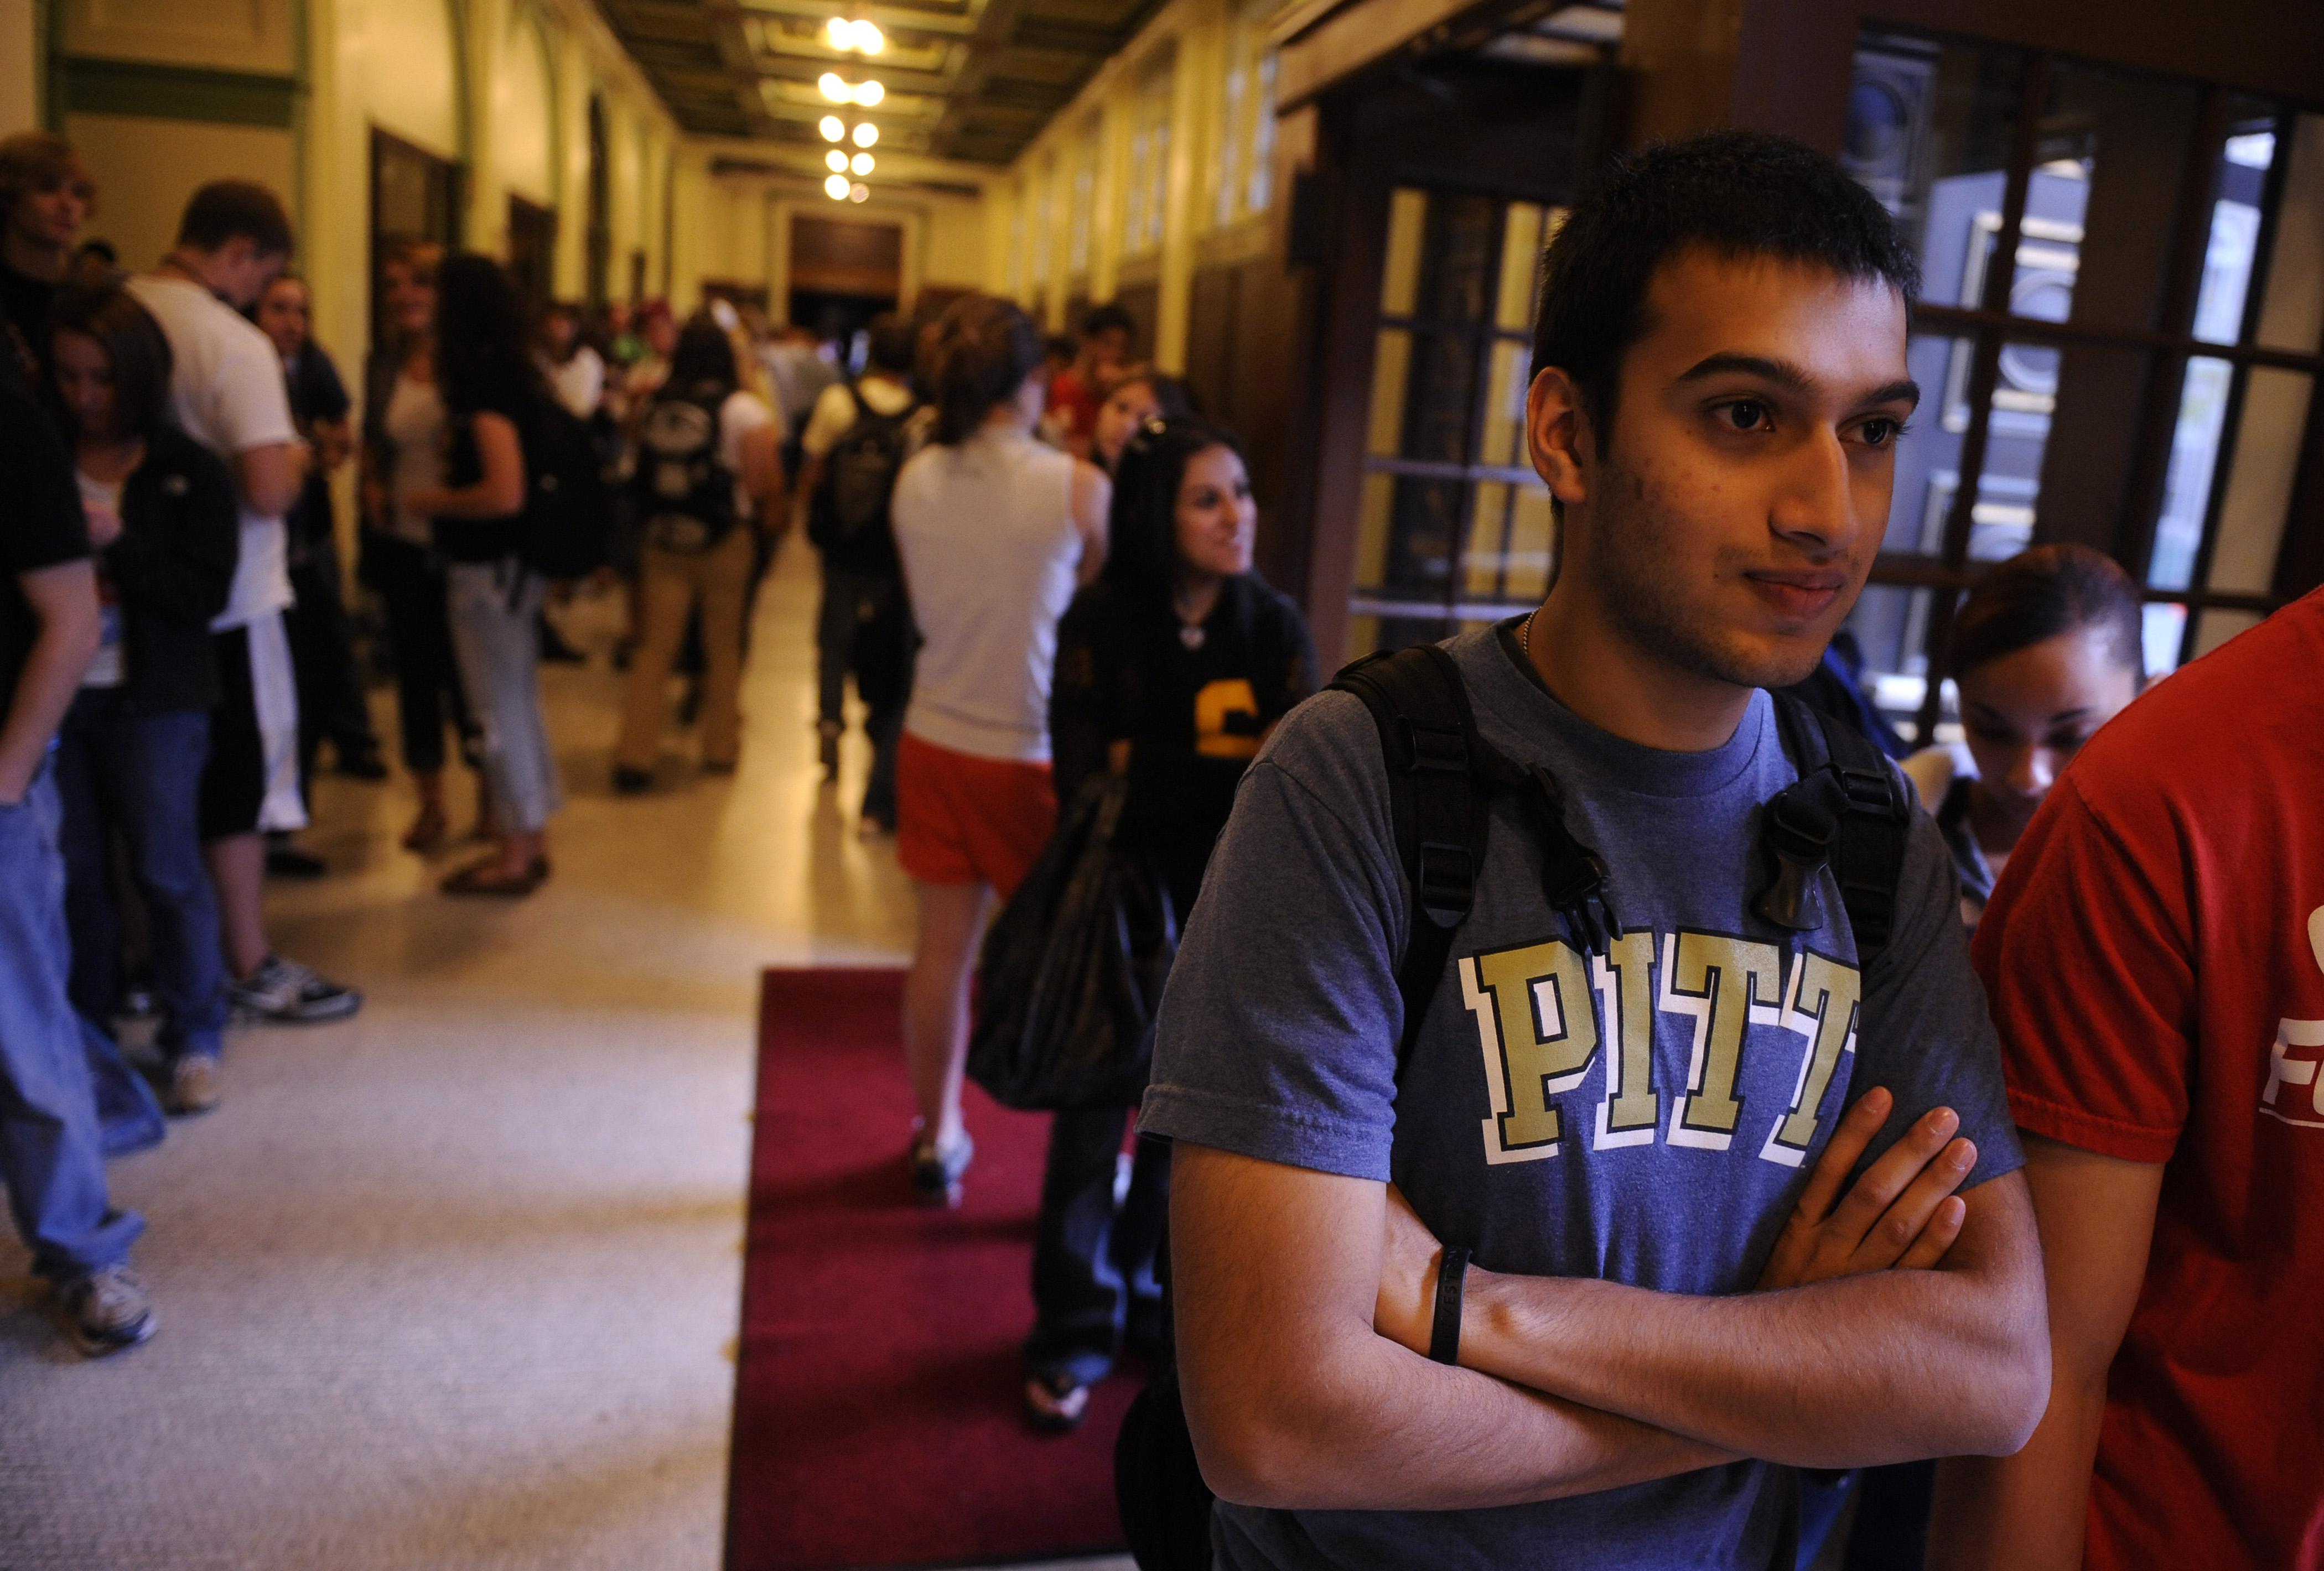 Students at the University of Pittsburgh.